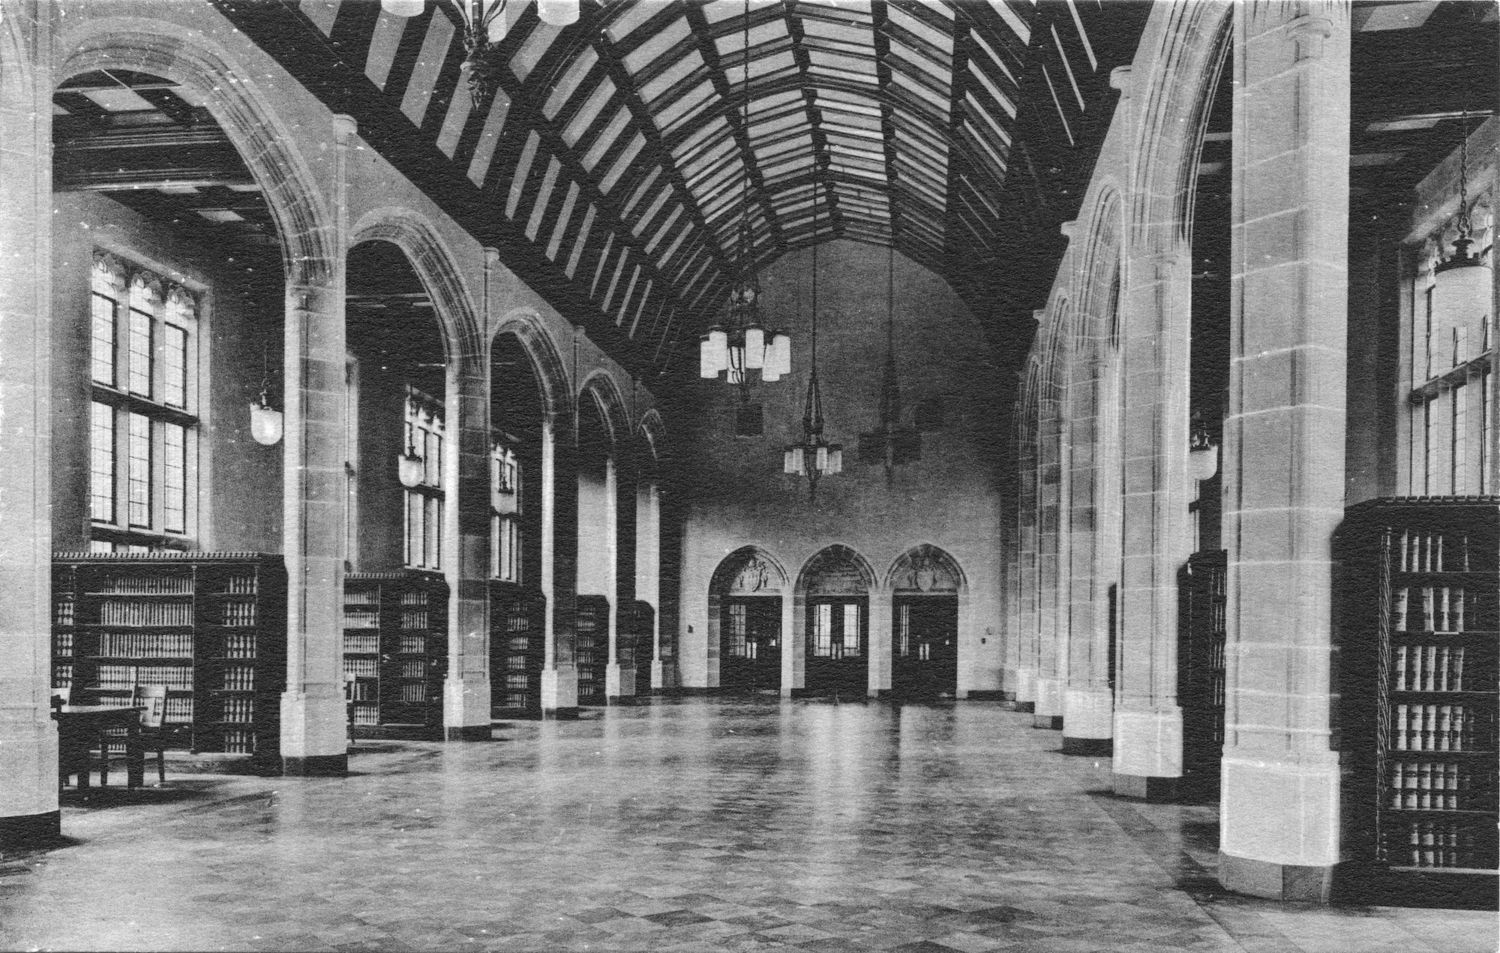 Inside the law library interior